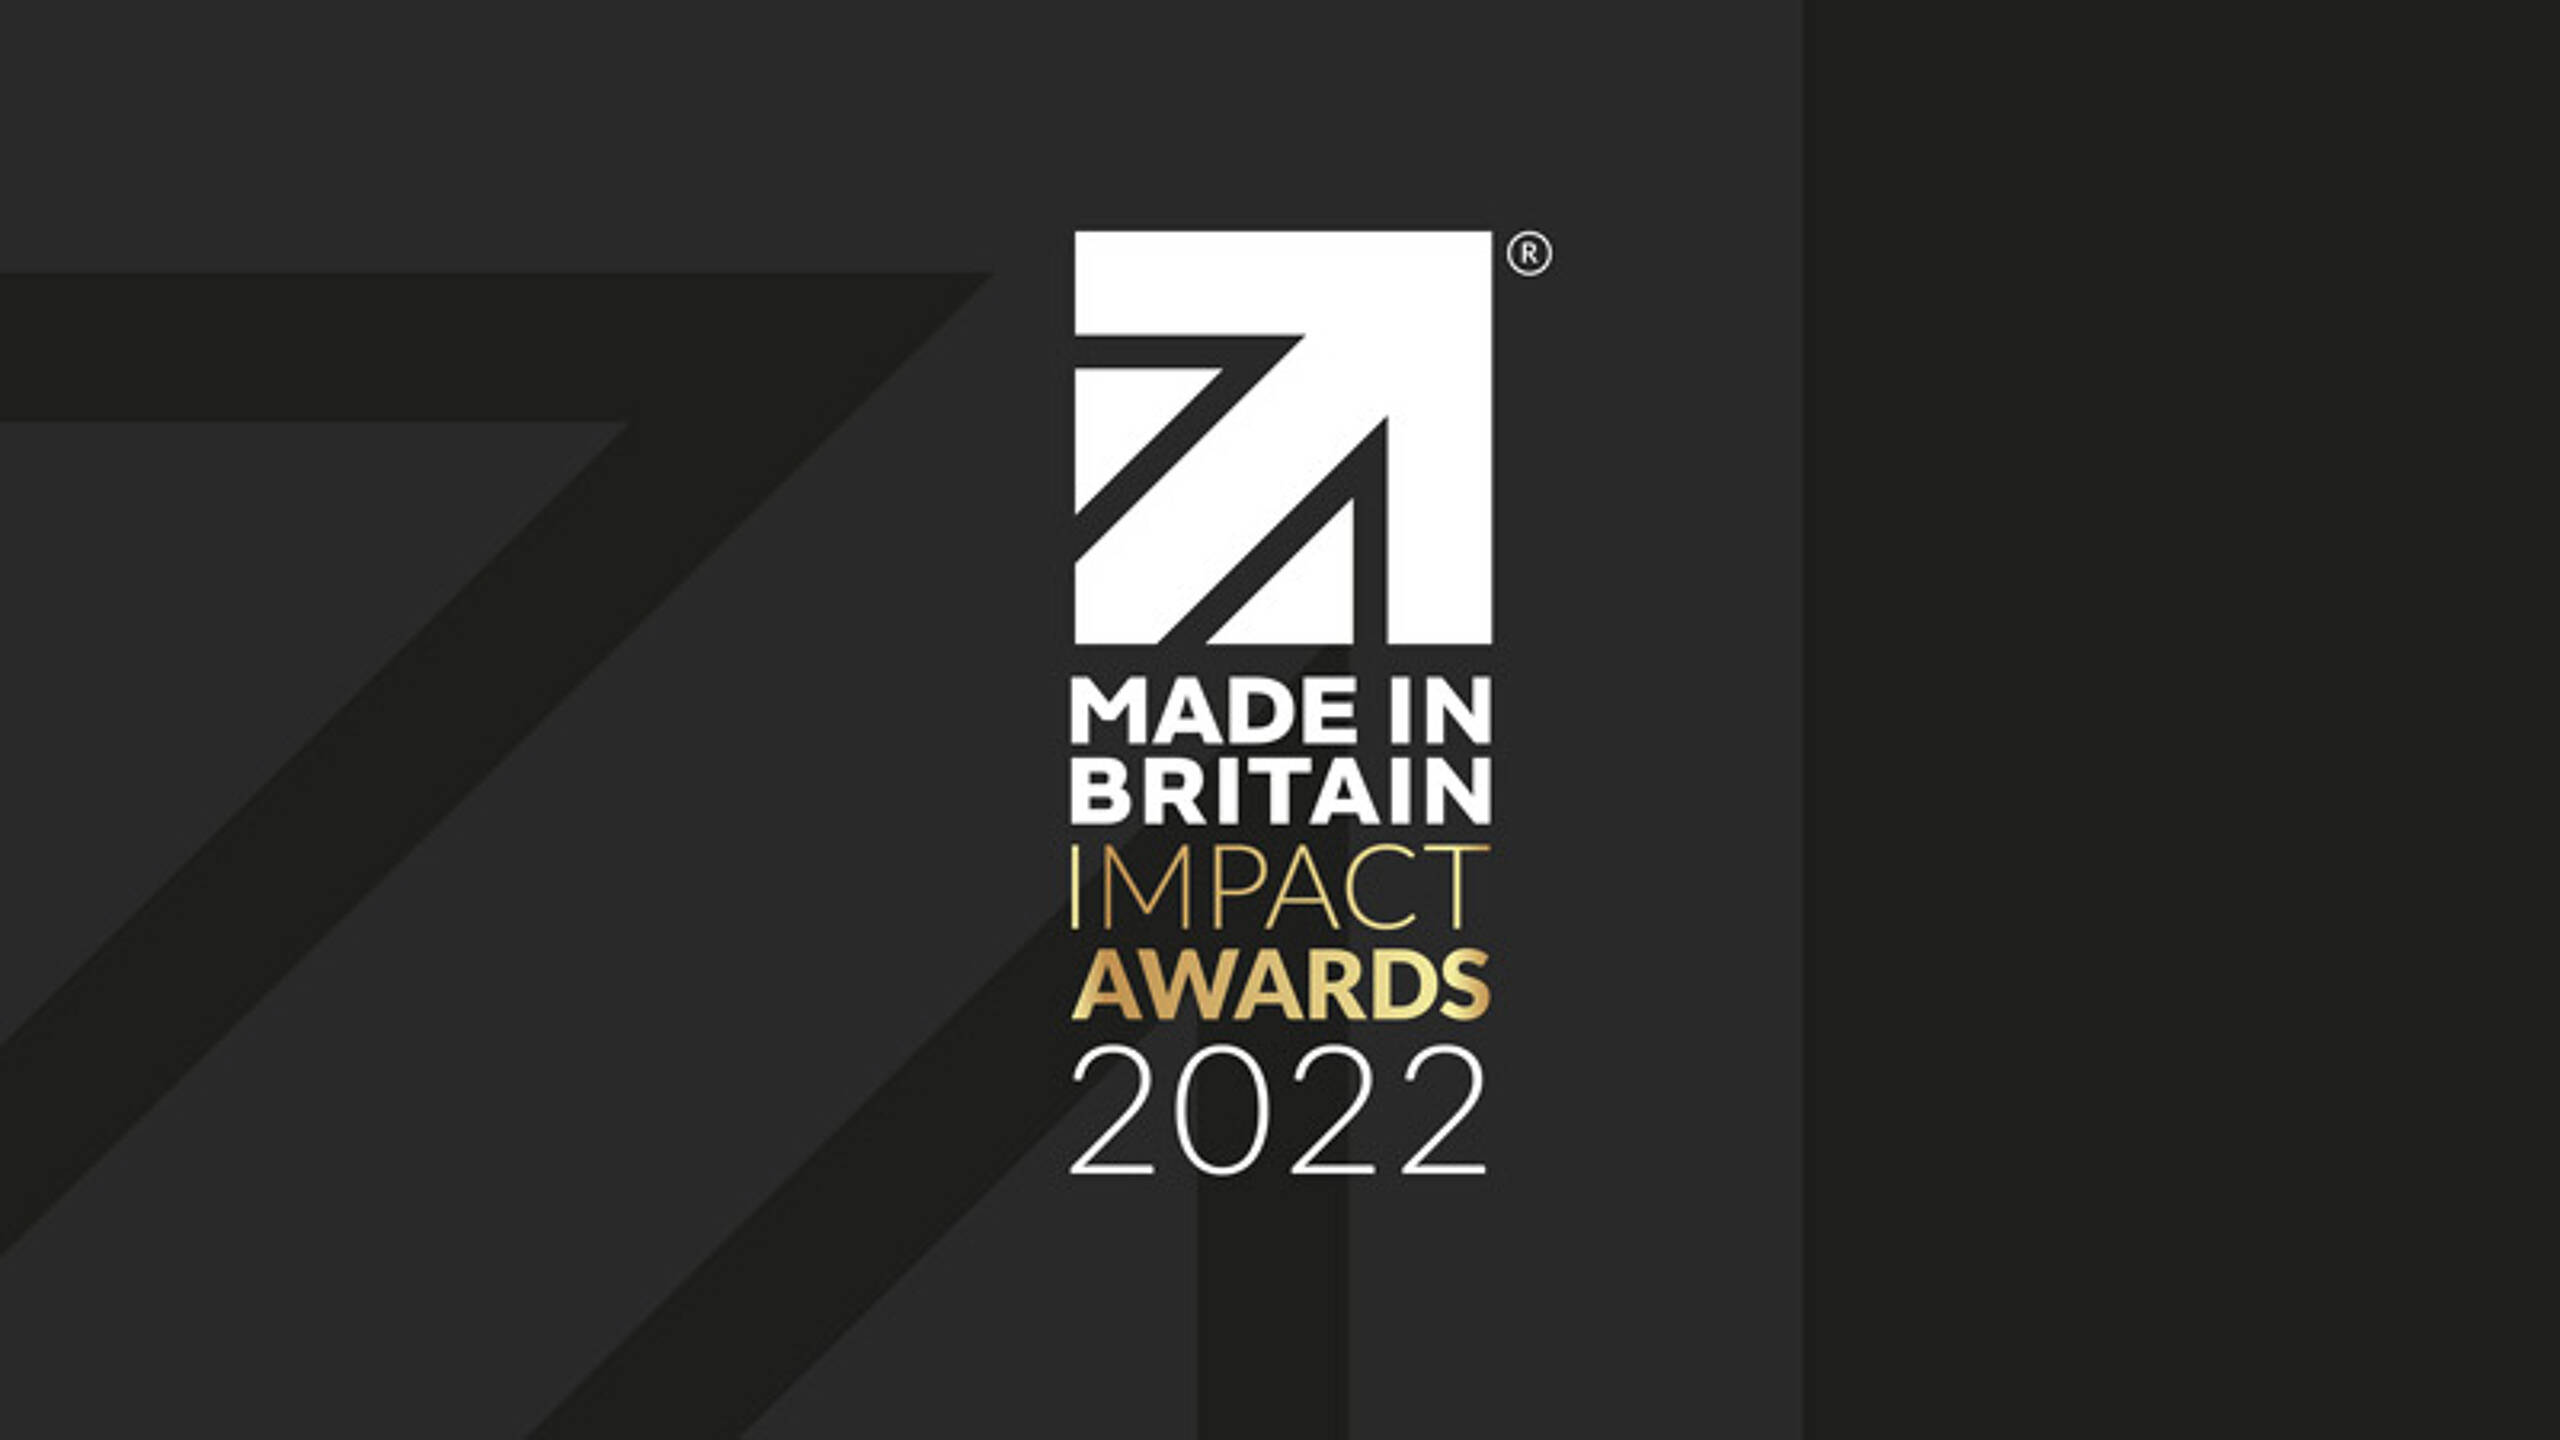 Made in Britain announces winners of its inaugural Impact Awards, recognising sustainability champions in British manufacturing